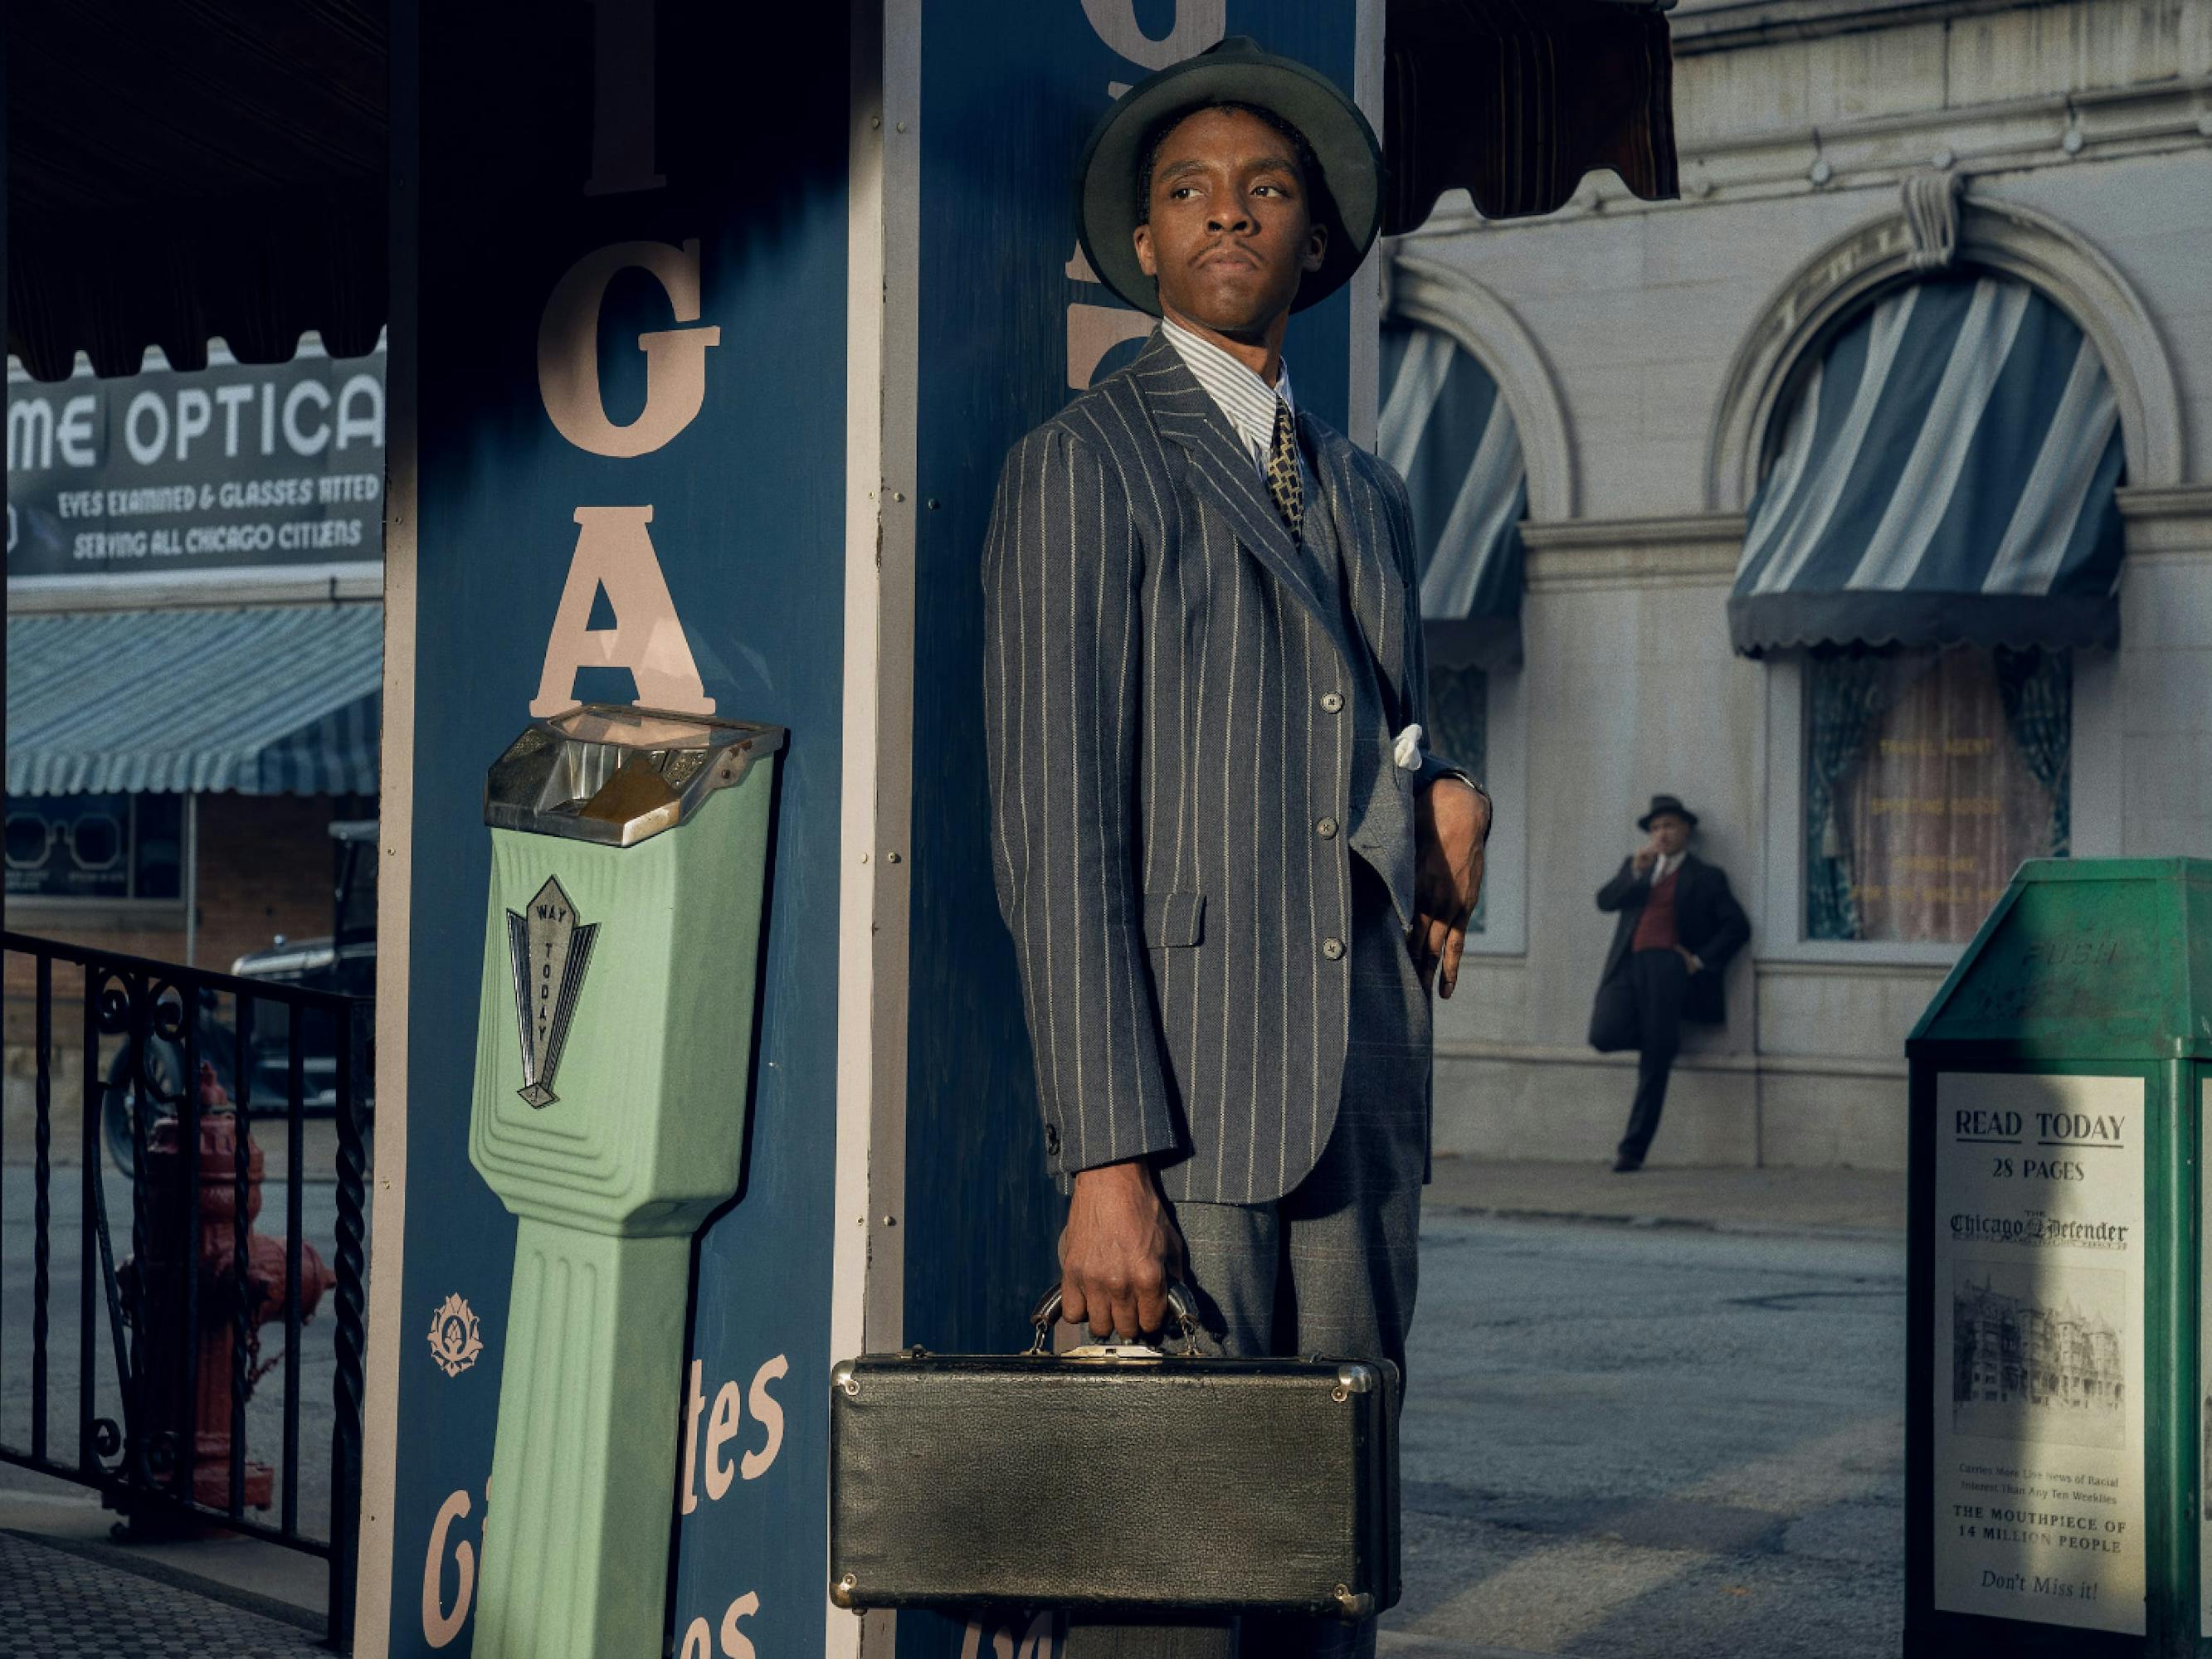 Boseman as Levee. He wears a striped blazer, grey hat, and carries a briefcase. In the background is another man leaning against a stone wall. There is an old green newspaper dispenser, and some striped awnings in the background. 